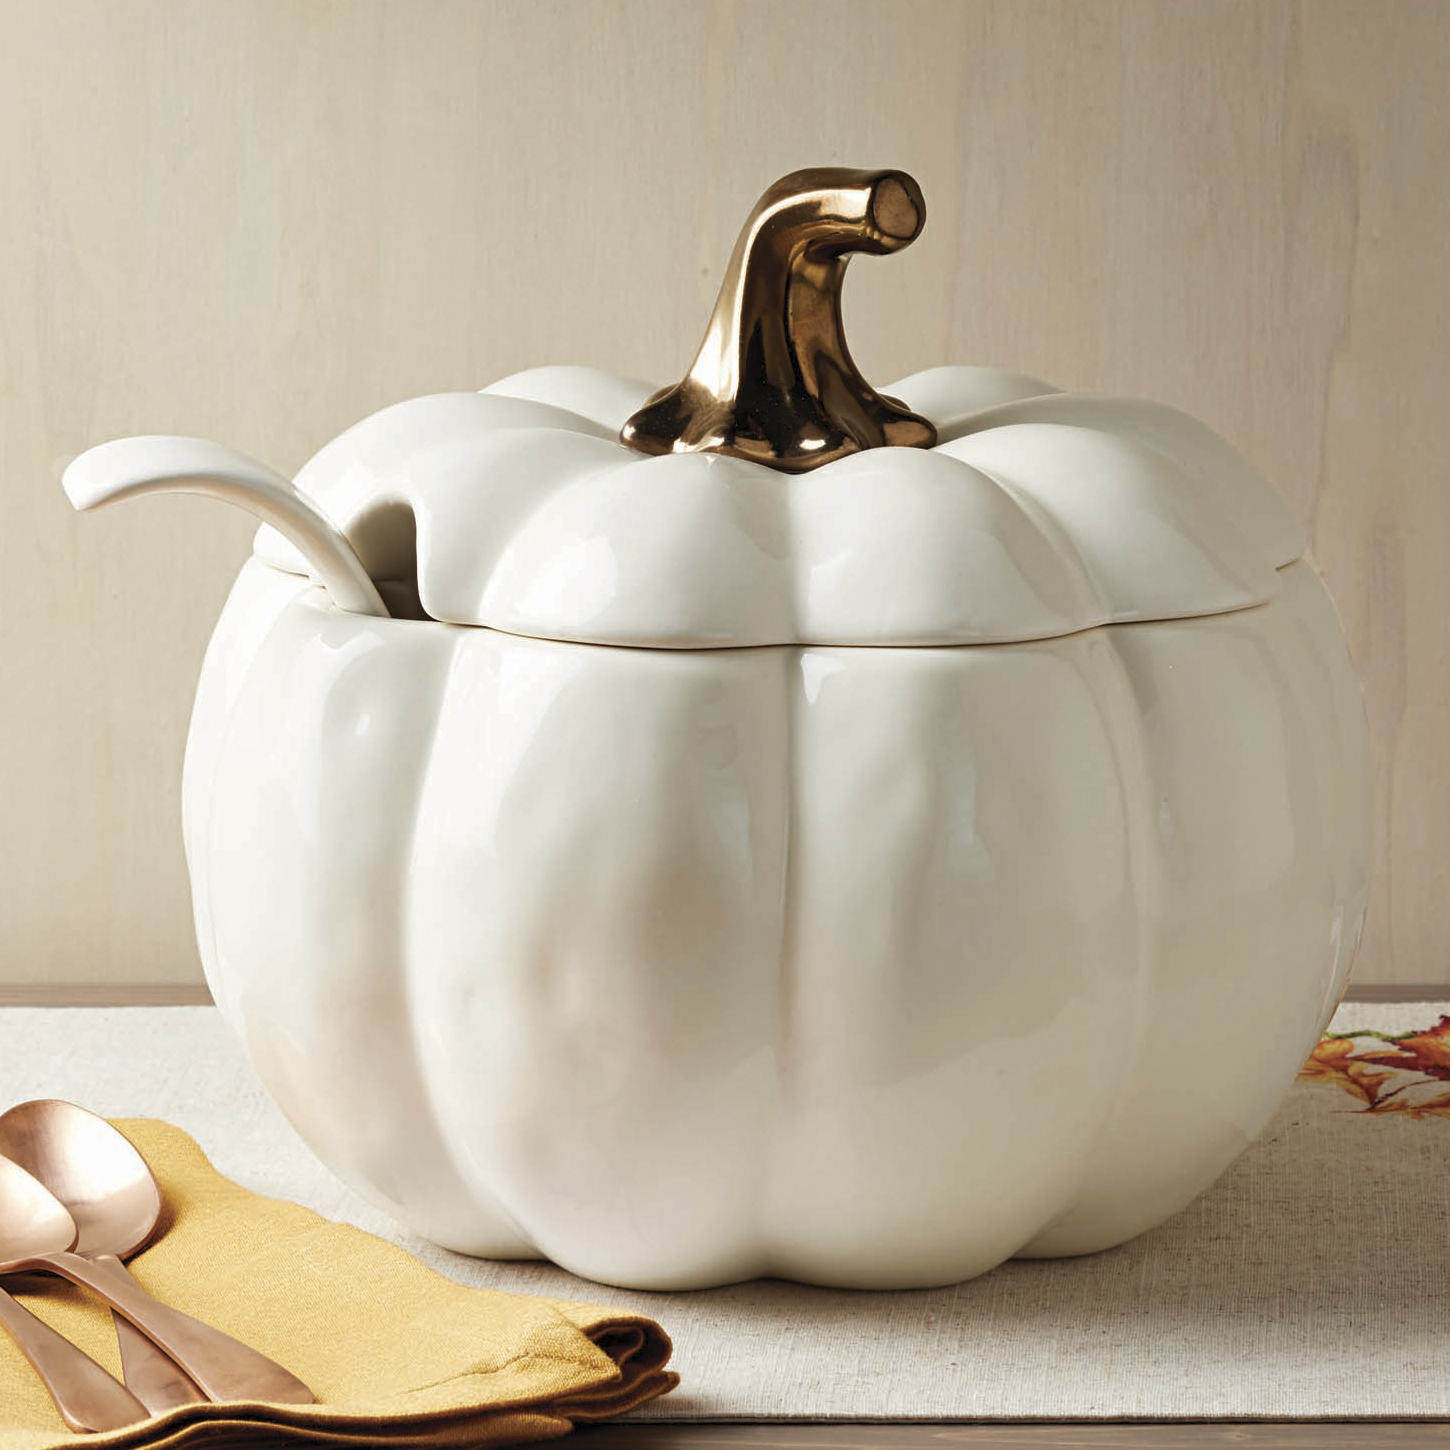 Better Homes & Gardens Pumpkin Soup Tureen Serving Bowl with Ladle - image 1 of 6